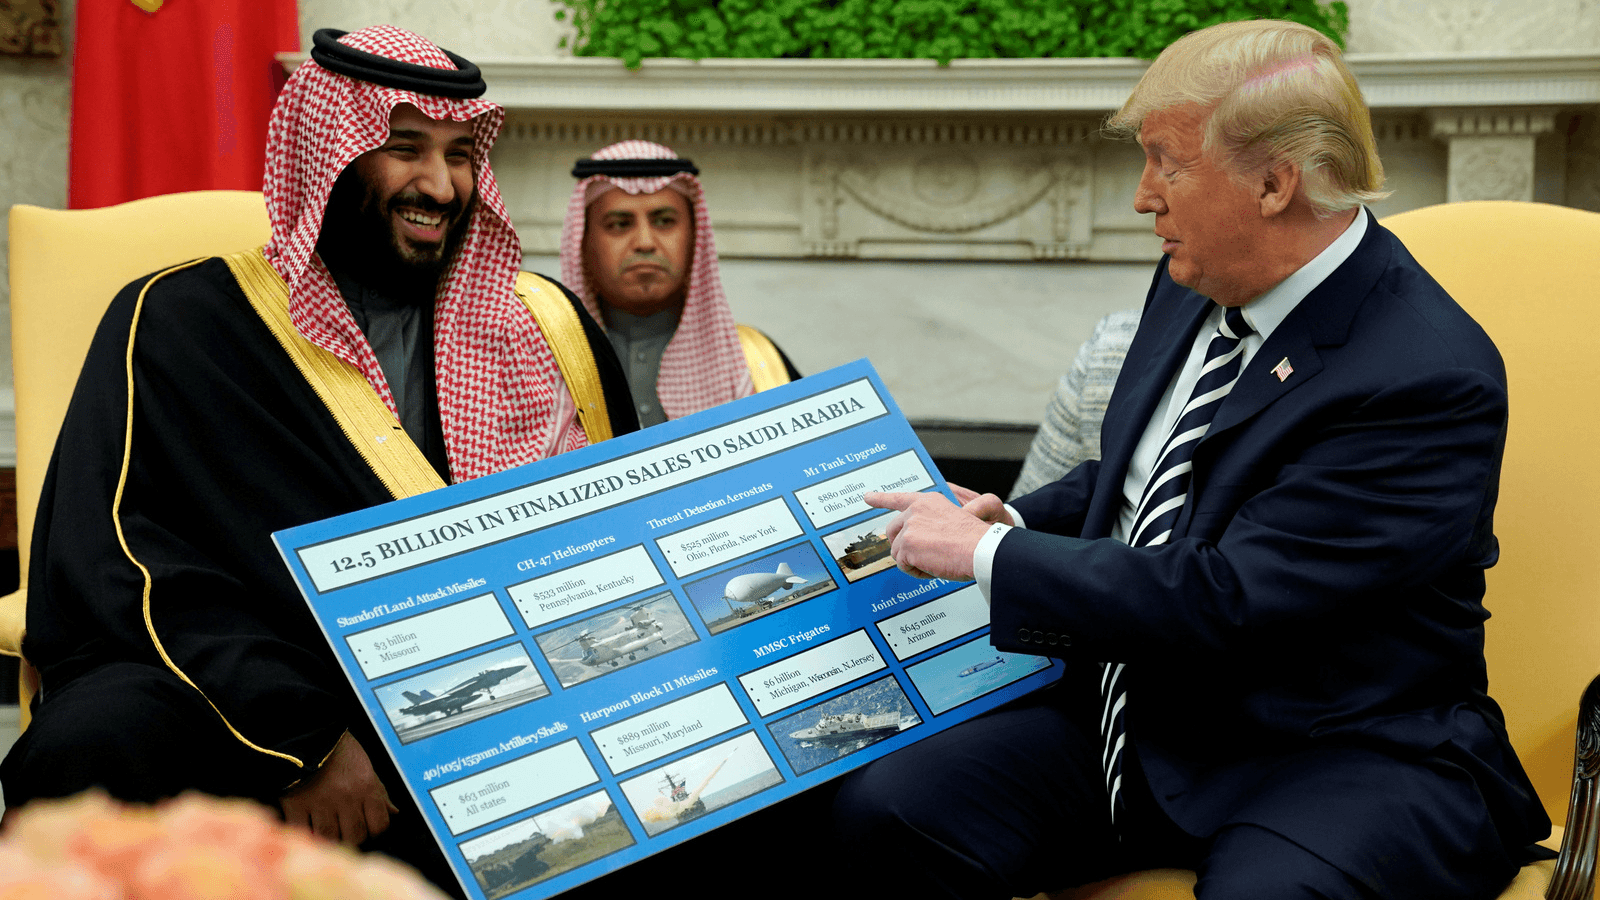 US President Donald Trump holds a chart of military hardware sales next to Saudi Arabia's Crown Prince at the White House